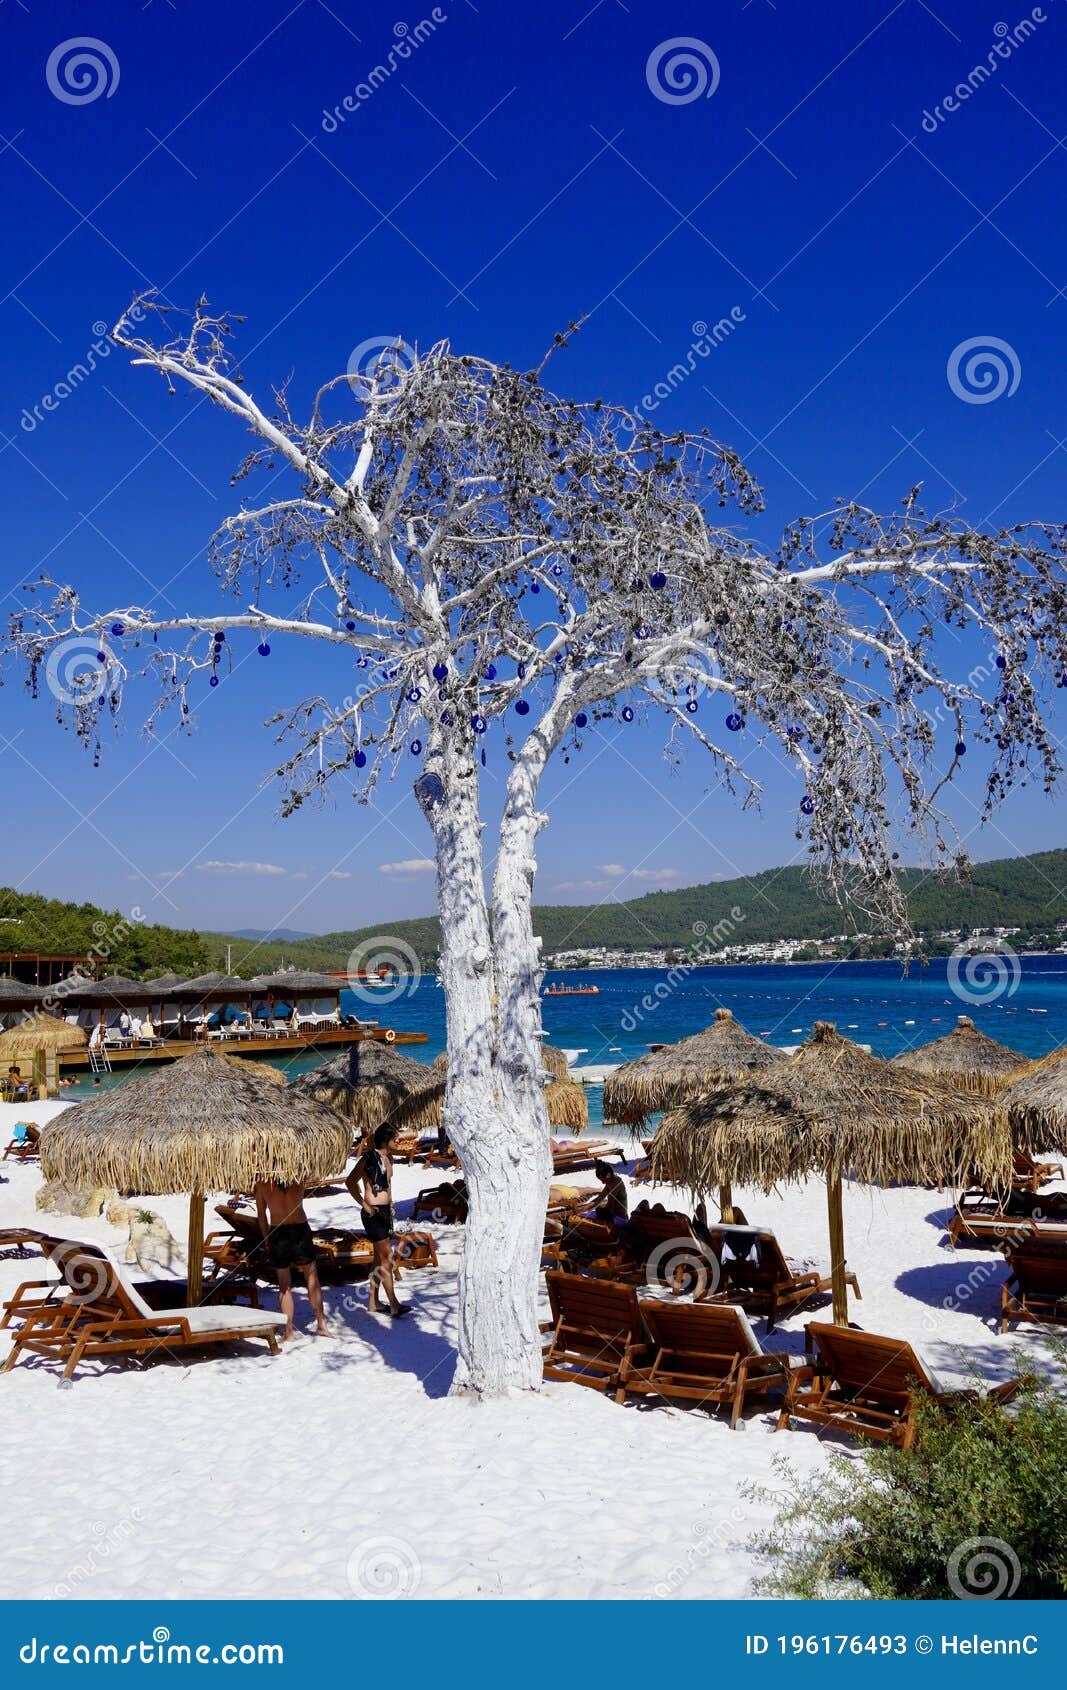 bodrum, turkey - august 2020: lujo`s snow white beach with baboon umbrellas, wooden sunbeds, emerald colored aegean sea